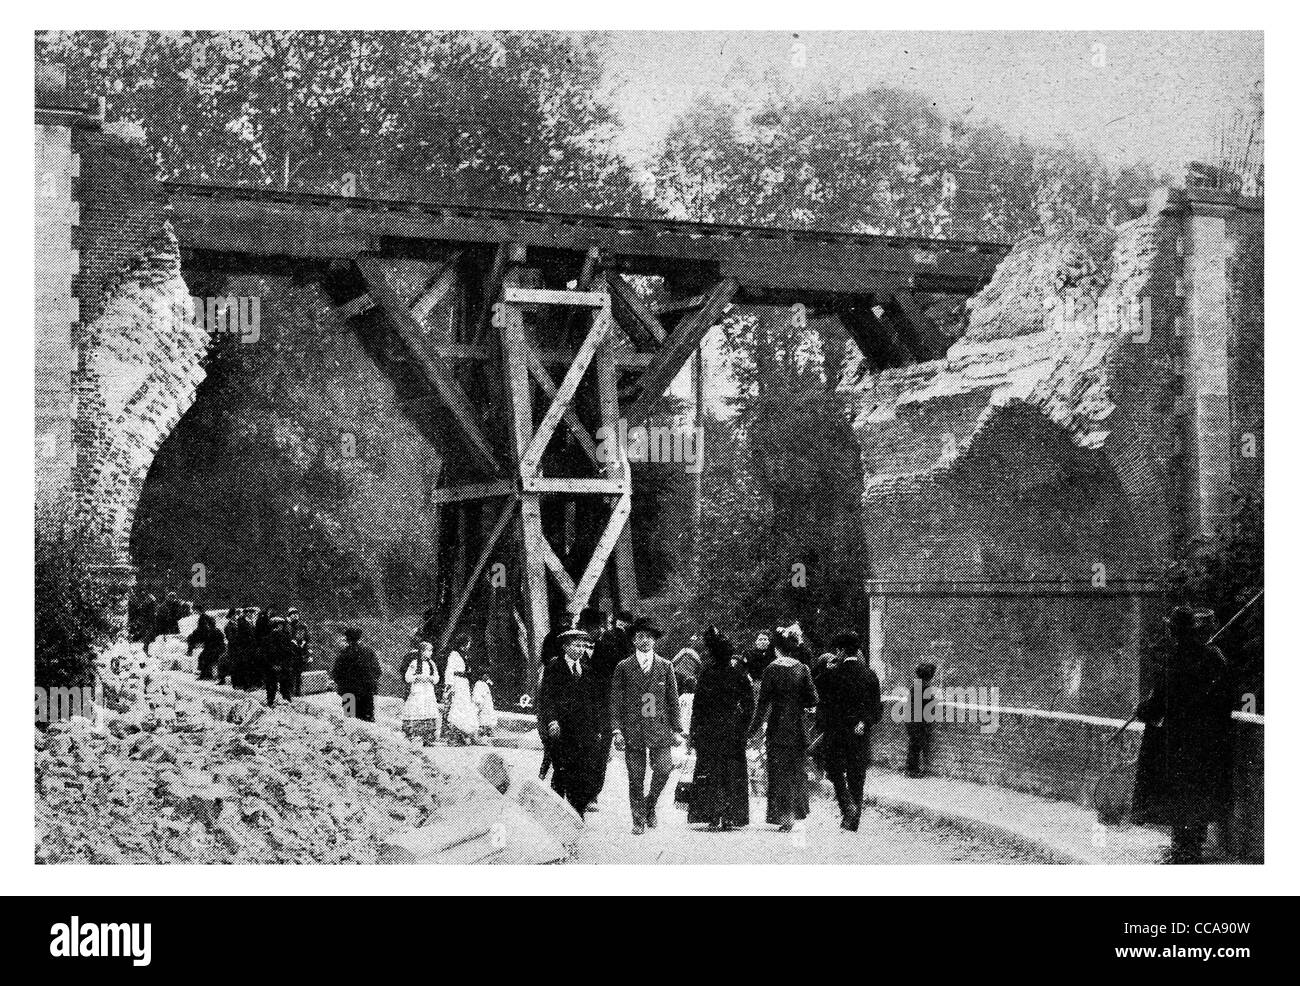 Military Royal Engineers skill at Ameins Rouen timber bridge engineering structure railway rail train track reconstruction road Stock Photo